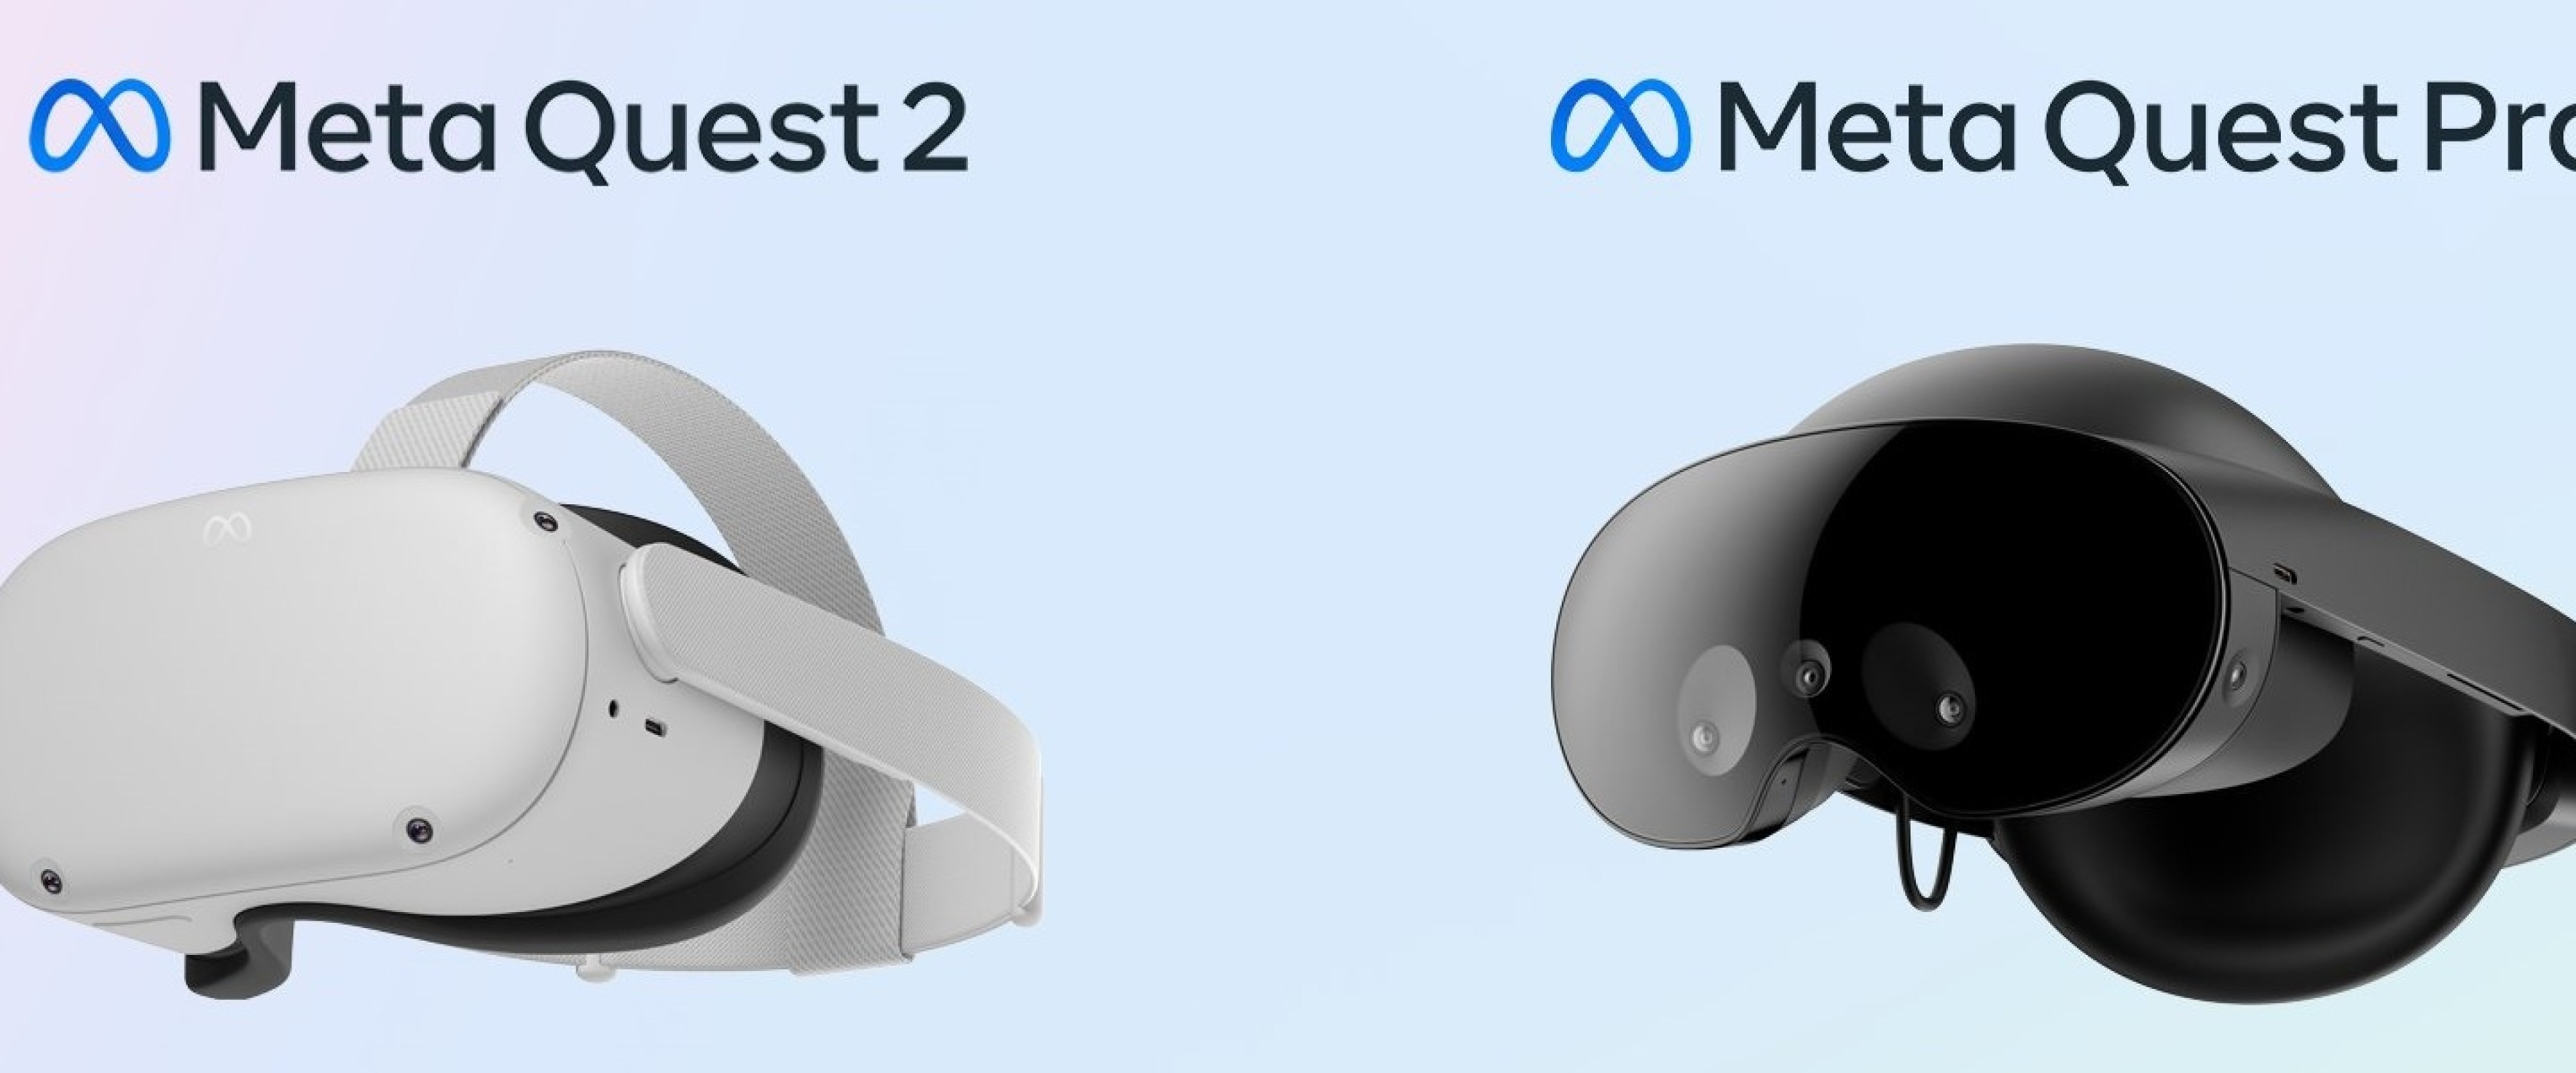 Image of the Meta Quest 2 and Meta Quest Pro VR headsets.